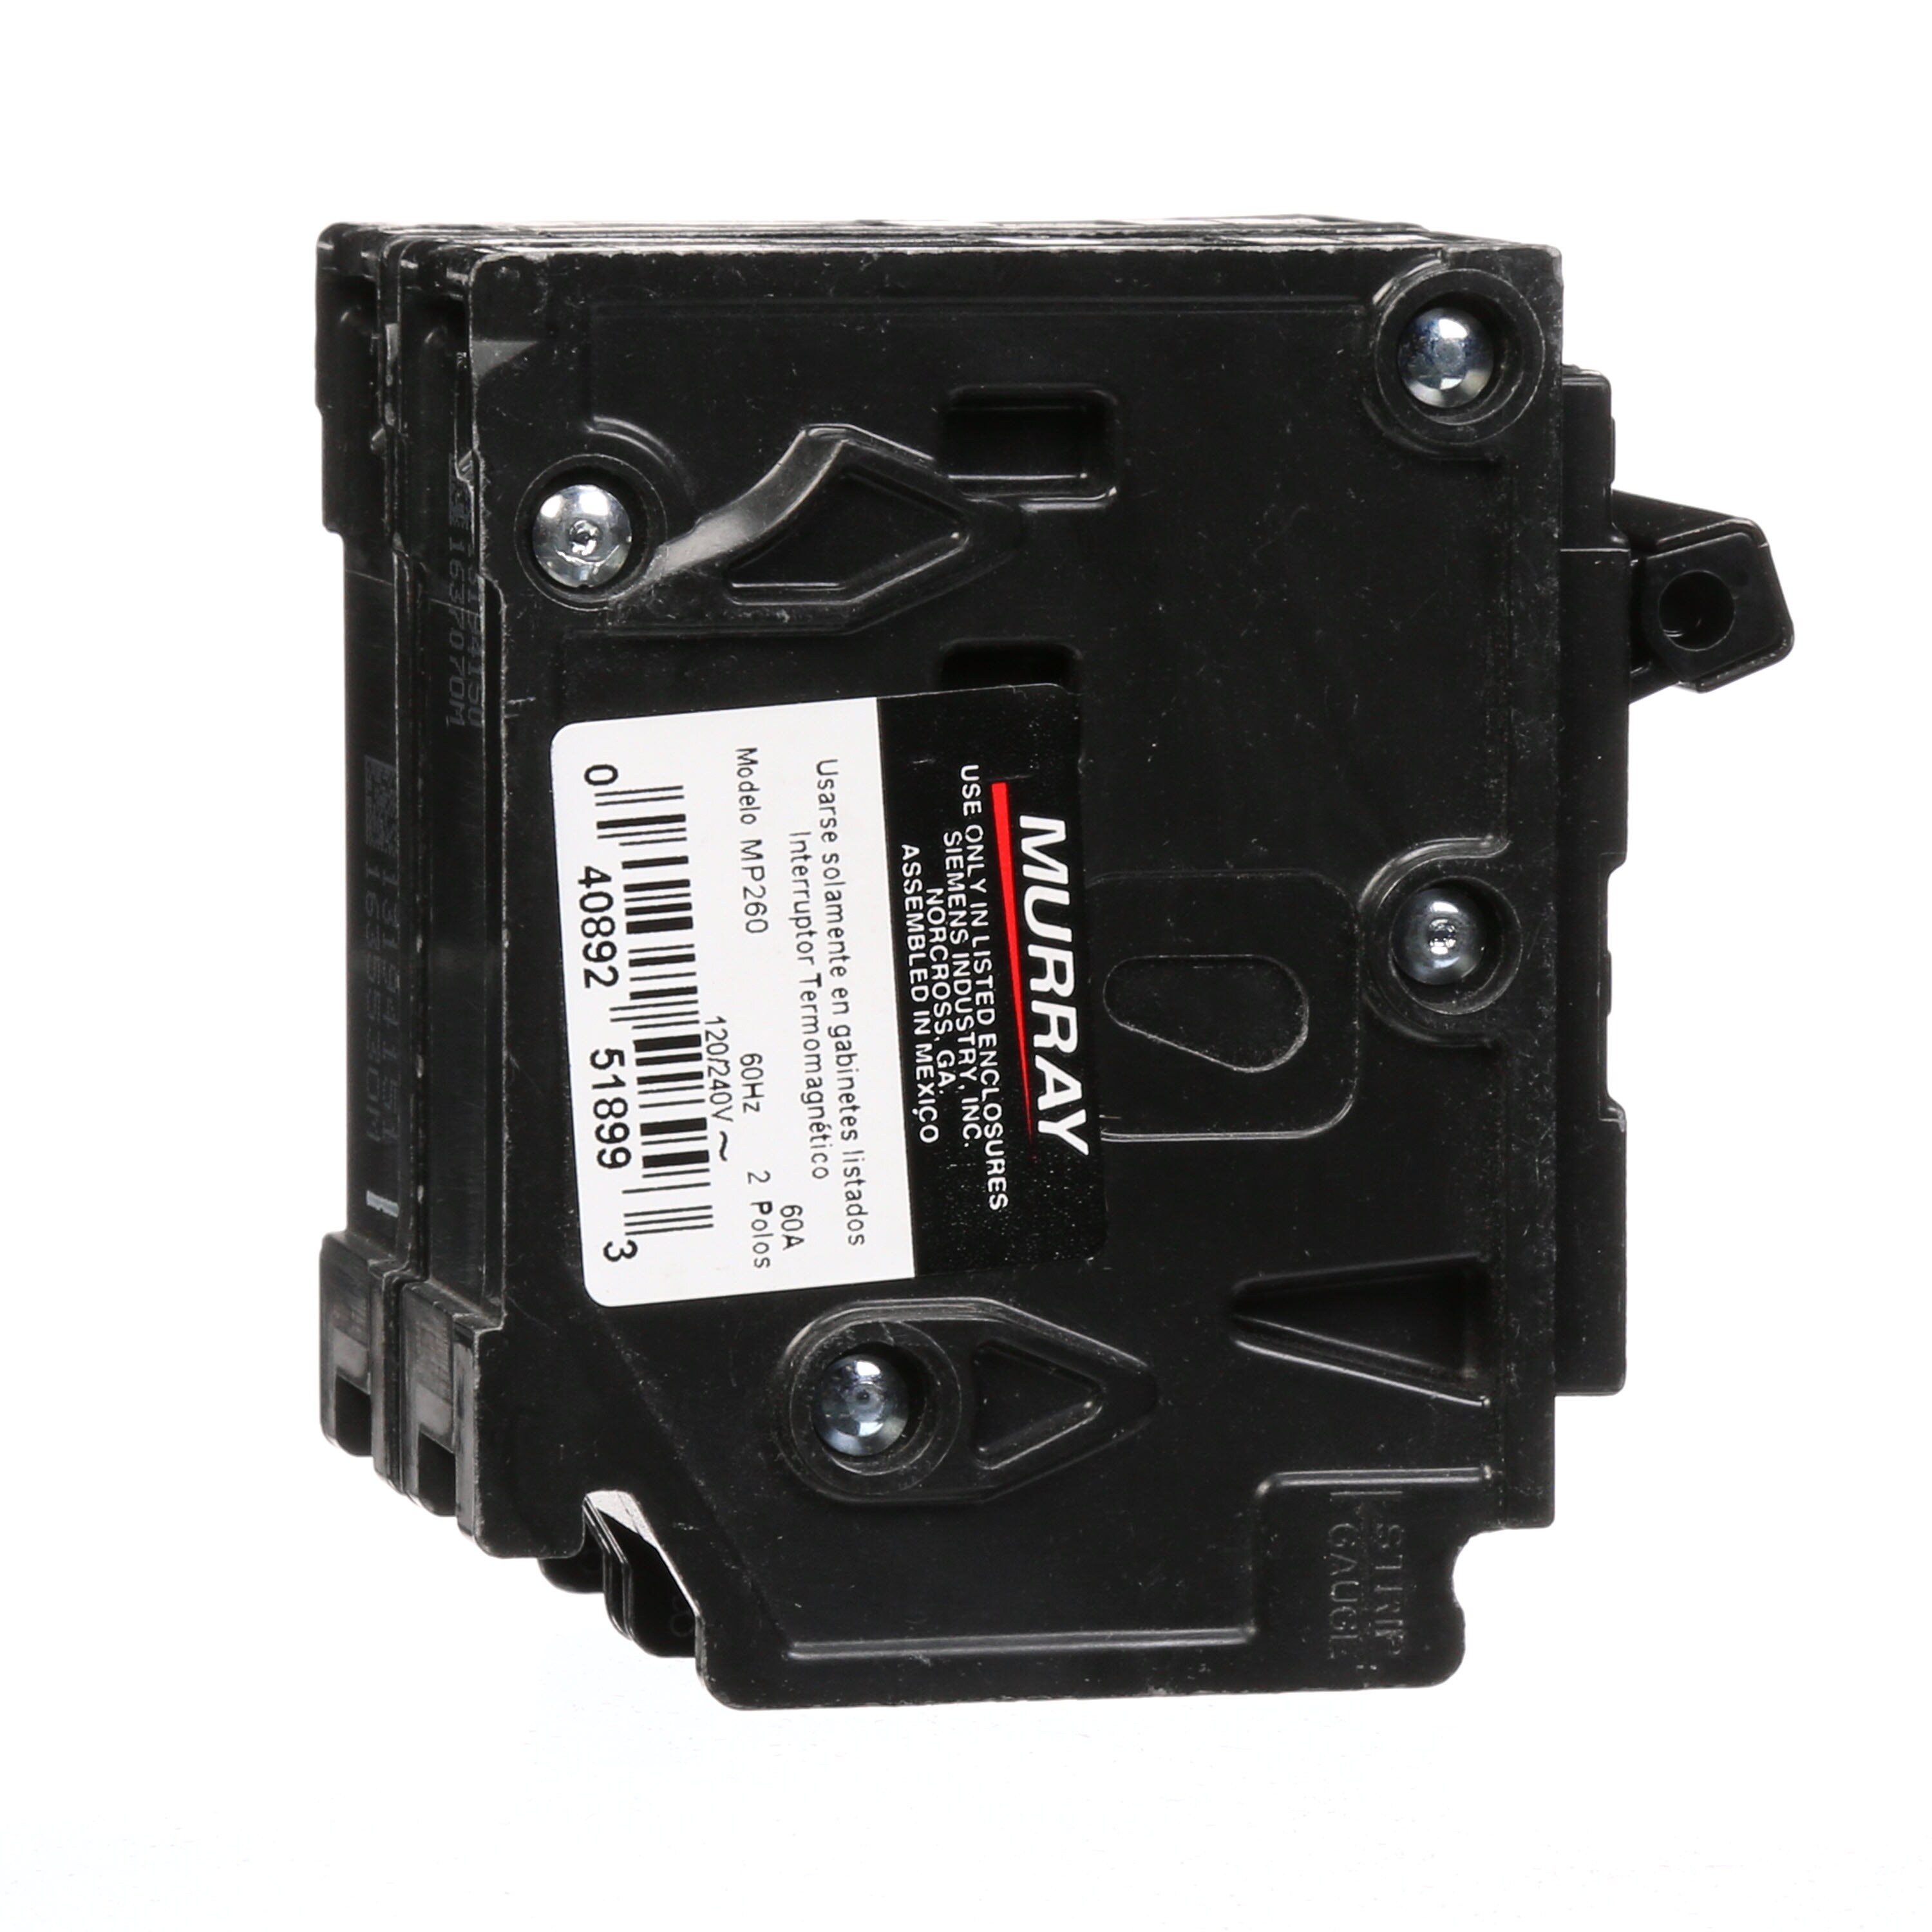 Murray MP360ST 240-Volt type MP-T 60-Amp Circuit Breaker with 120-Volt Shunt Trip Three pole 